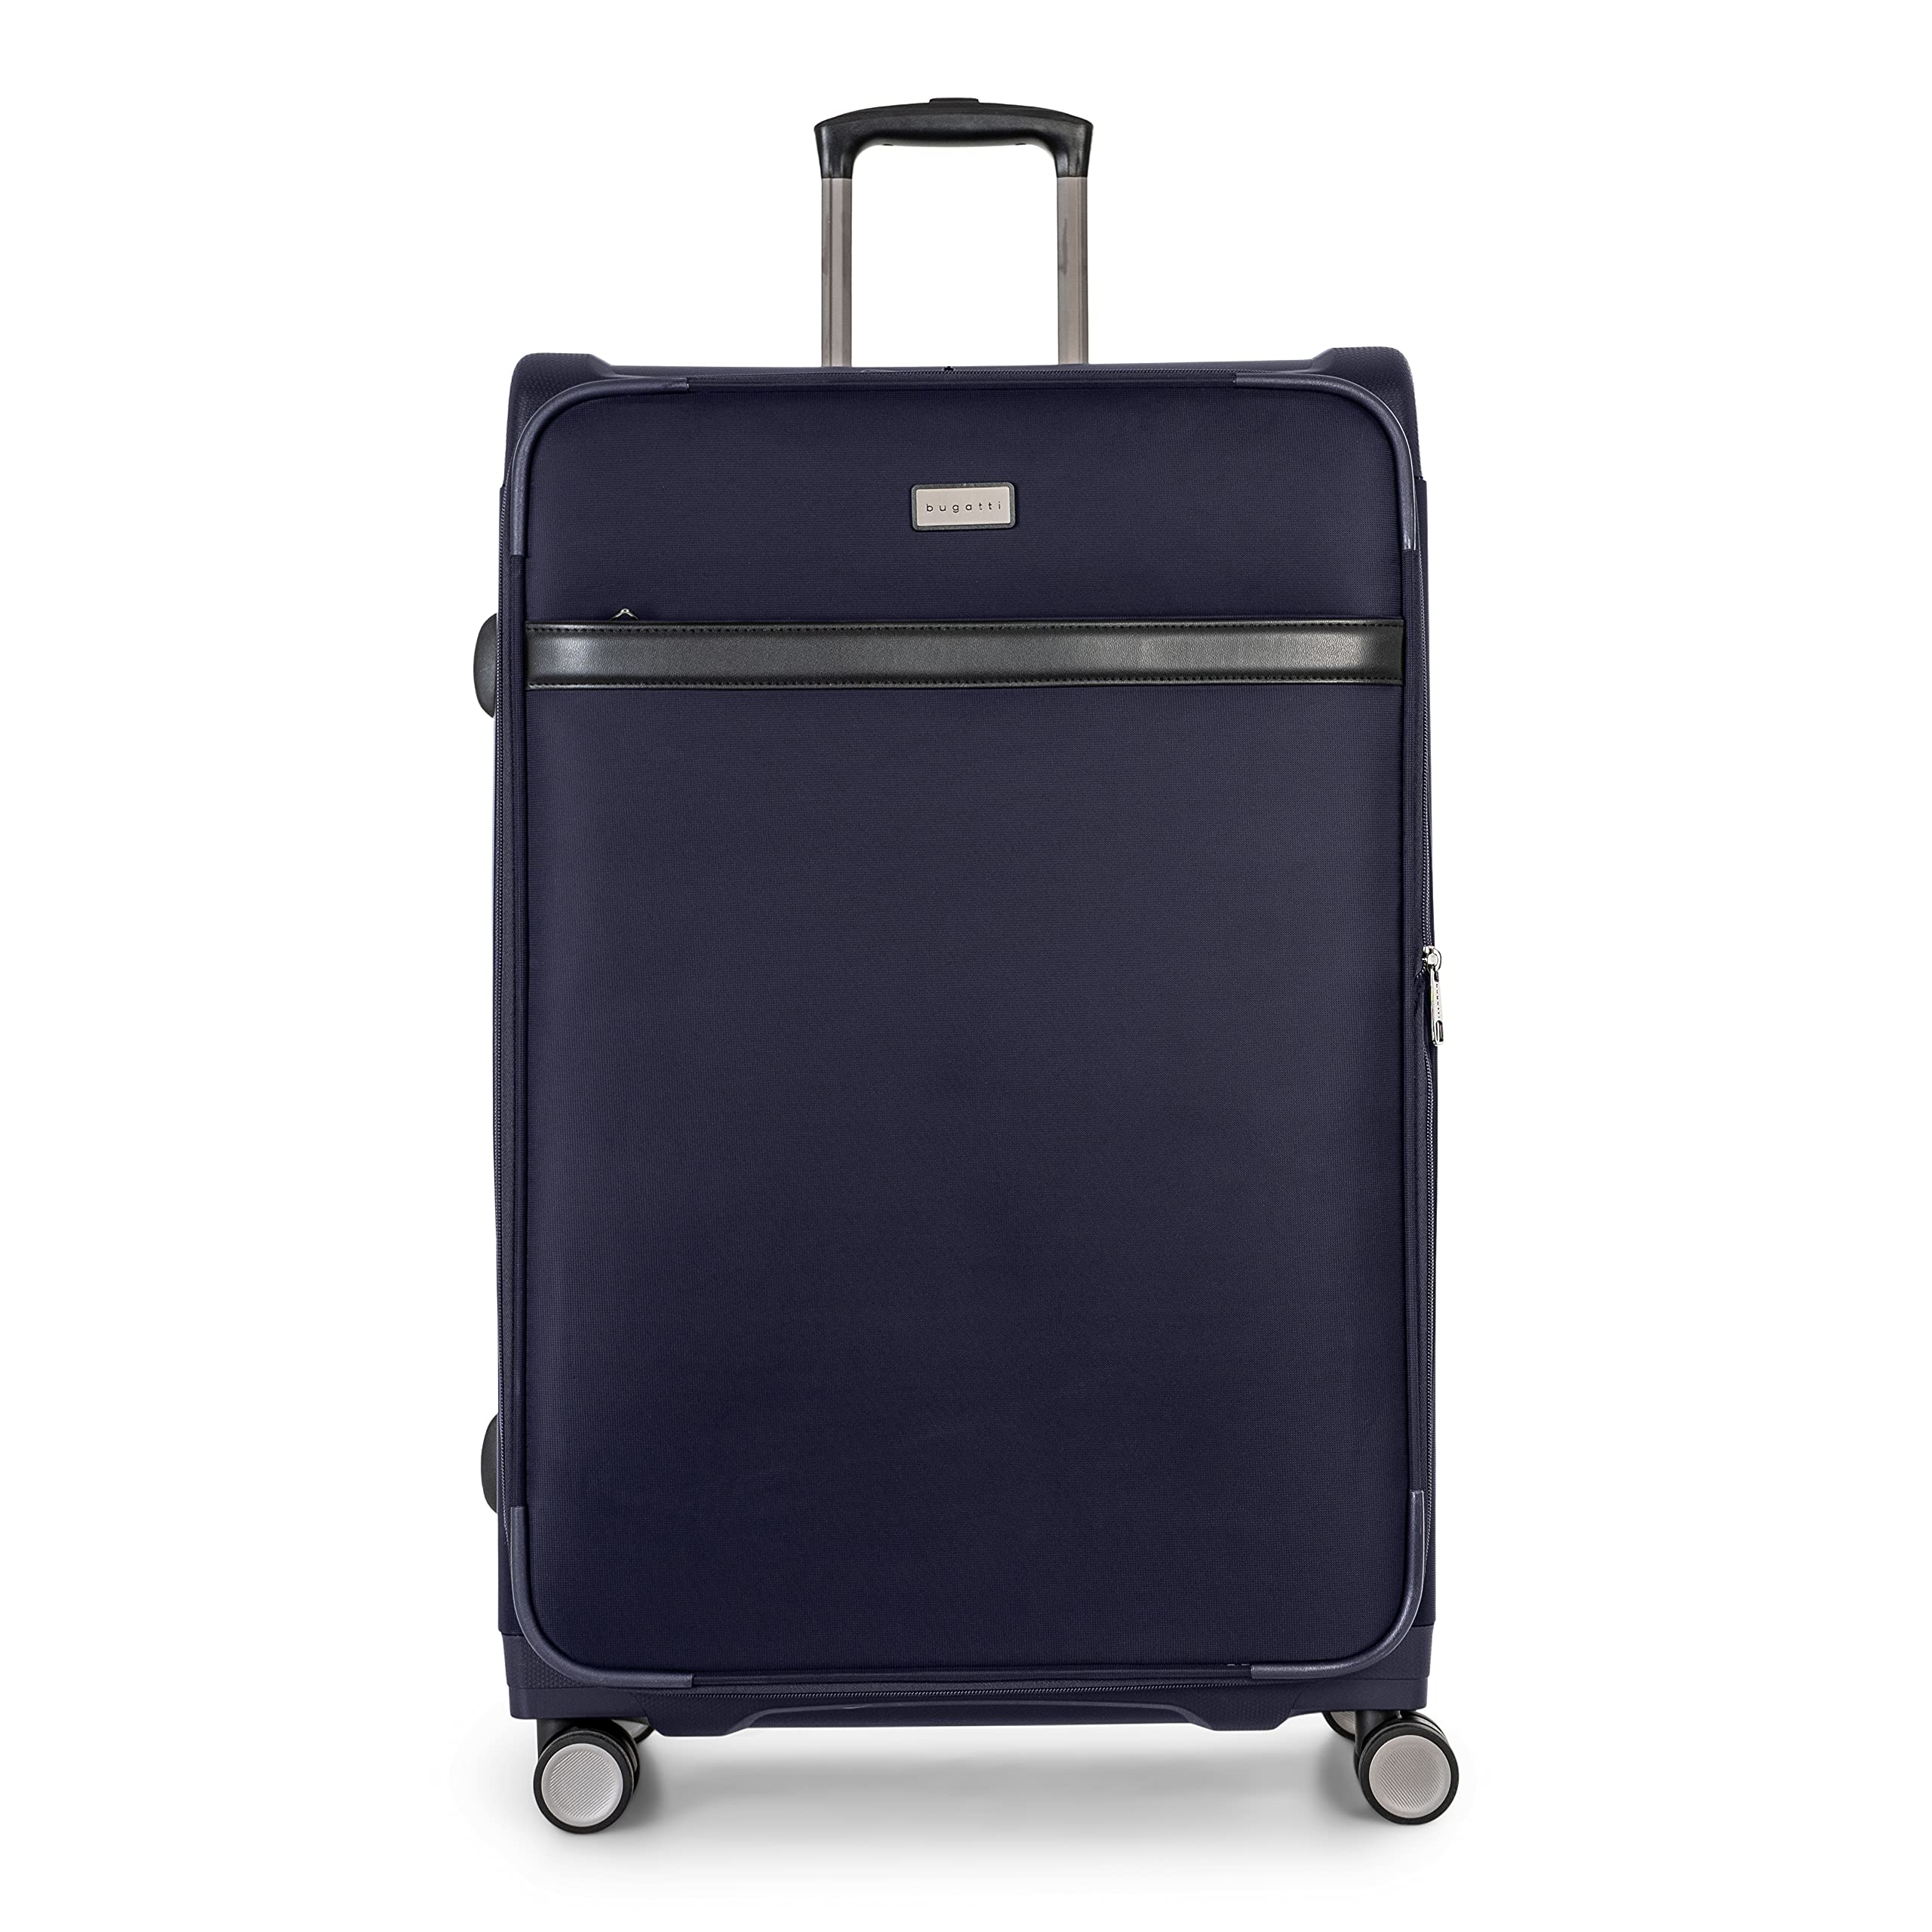 Bugatti - Washington collection - 29 luggage with 360-degree spinner wheels A luggage collection made of a Hybrid hardsidesoftsi